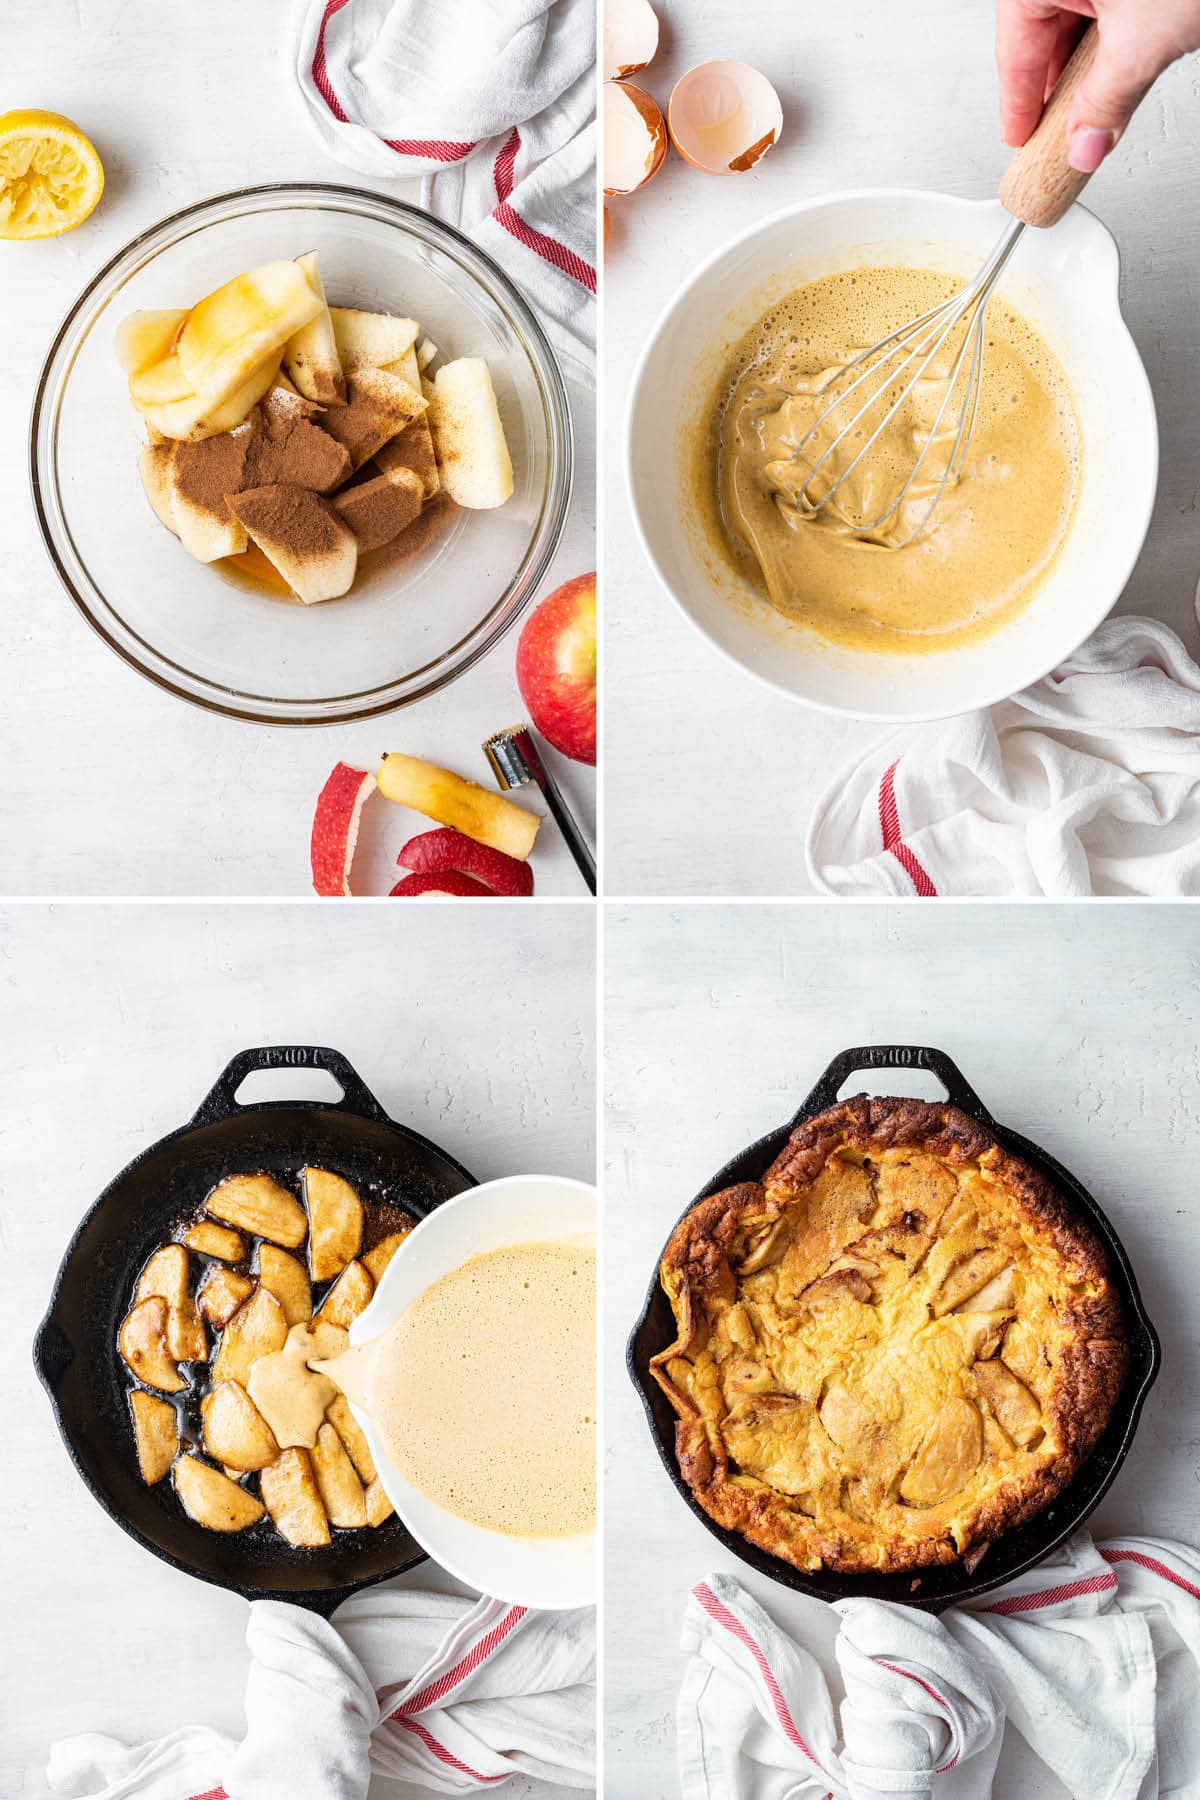 Collage of photos showing the steps to make an Apple Dutch Baby: making cinnamon apples, the batter, and then cooking everything in a skillet.